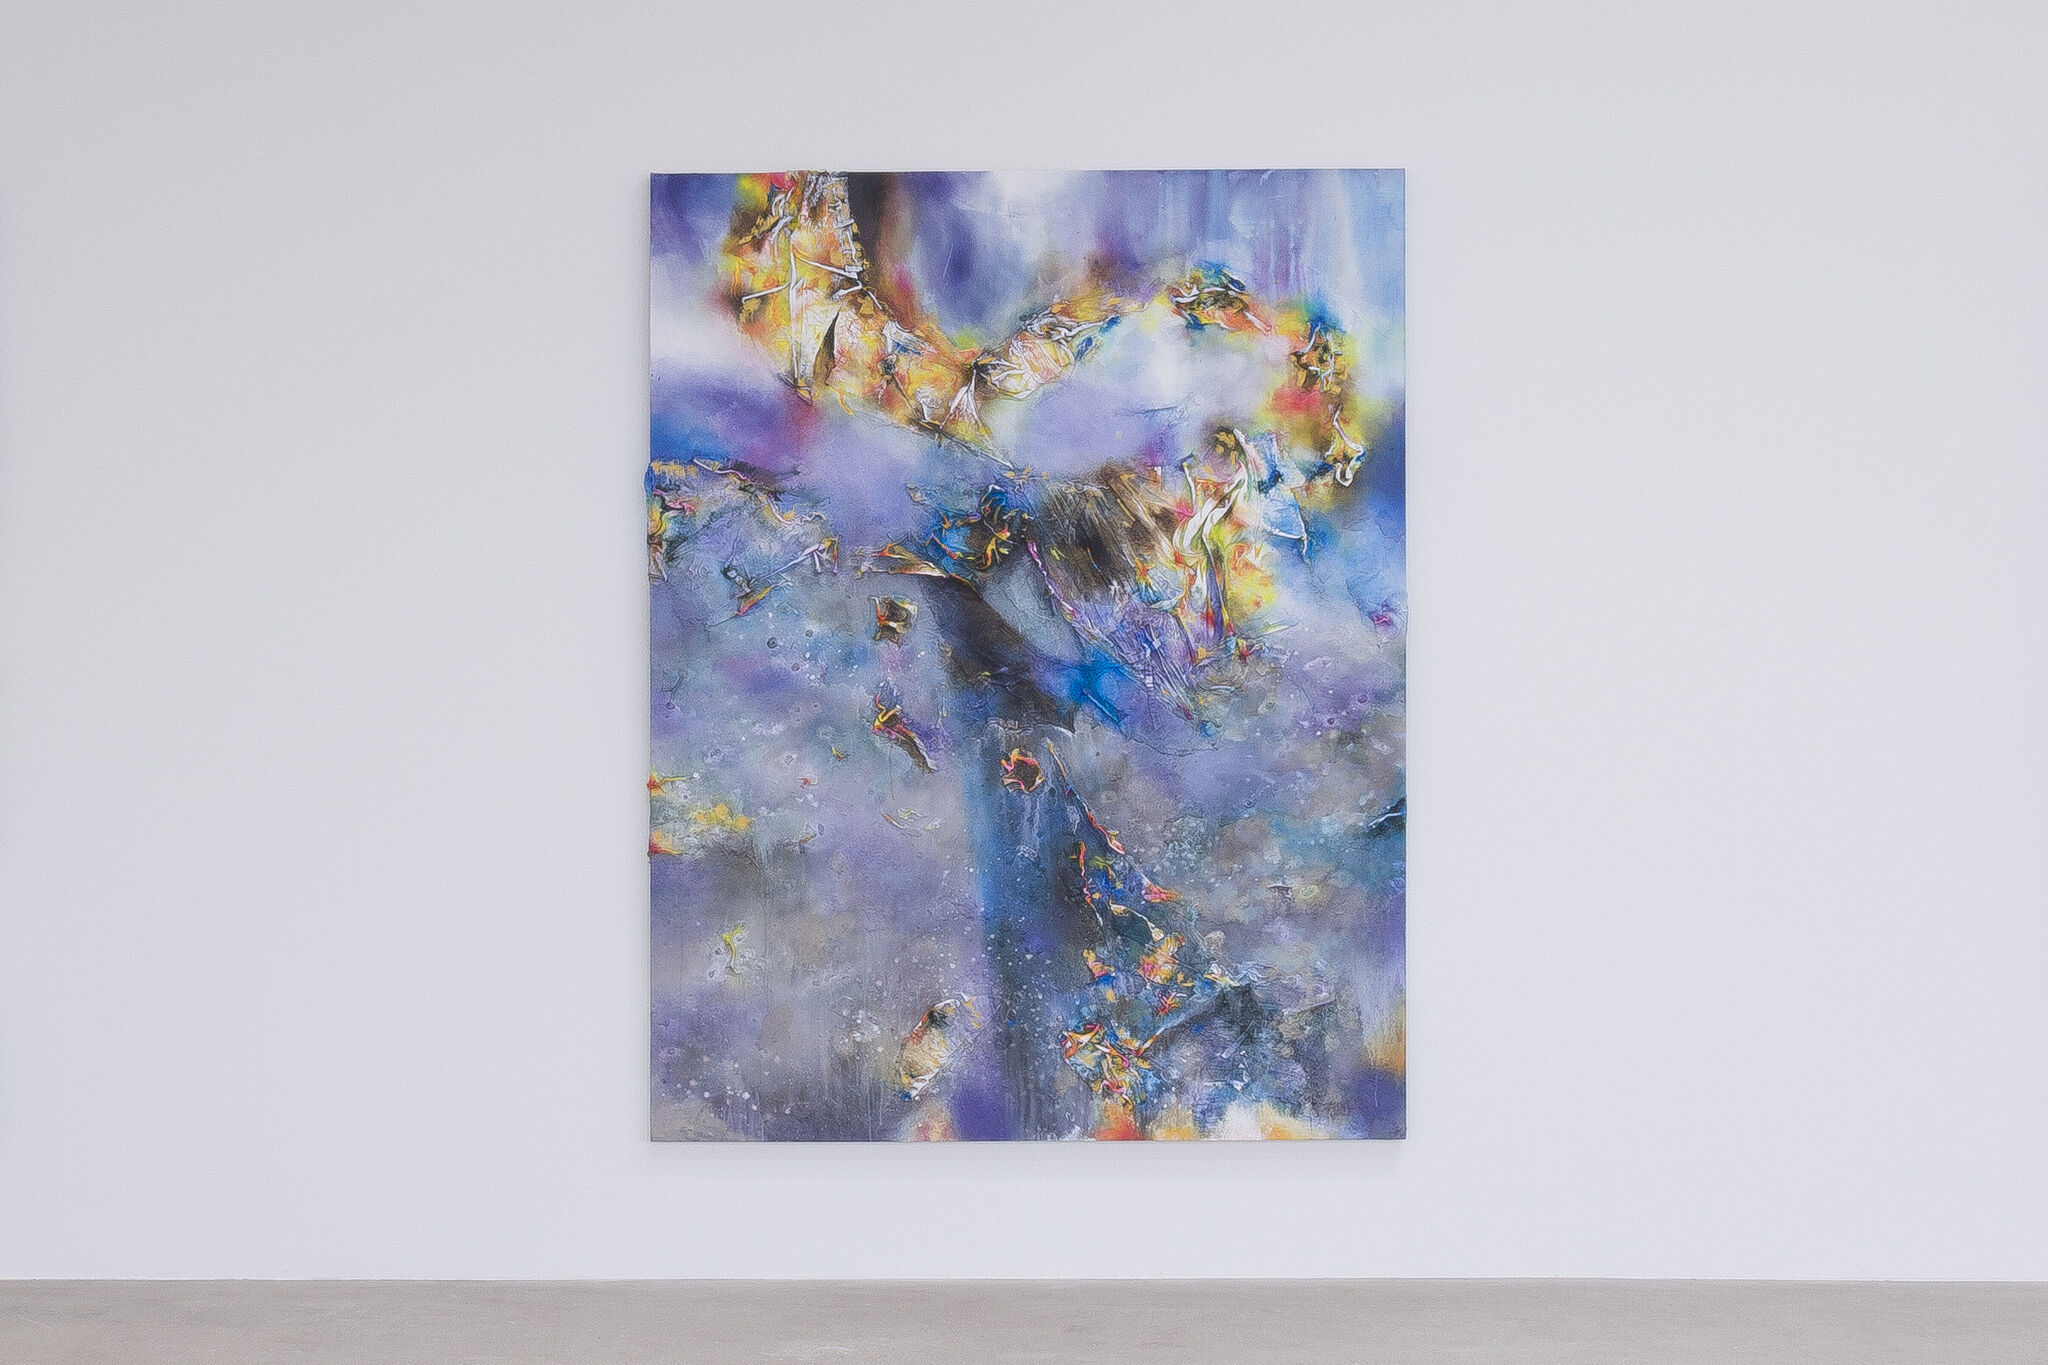 An installation shot of a work mounted on a white exhibition wall. The work features an abstract color gradient with blue, purple, orange, and yellow. 